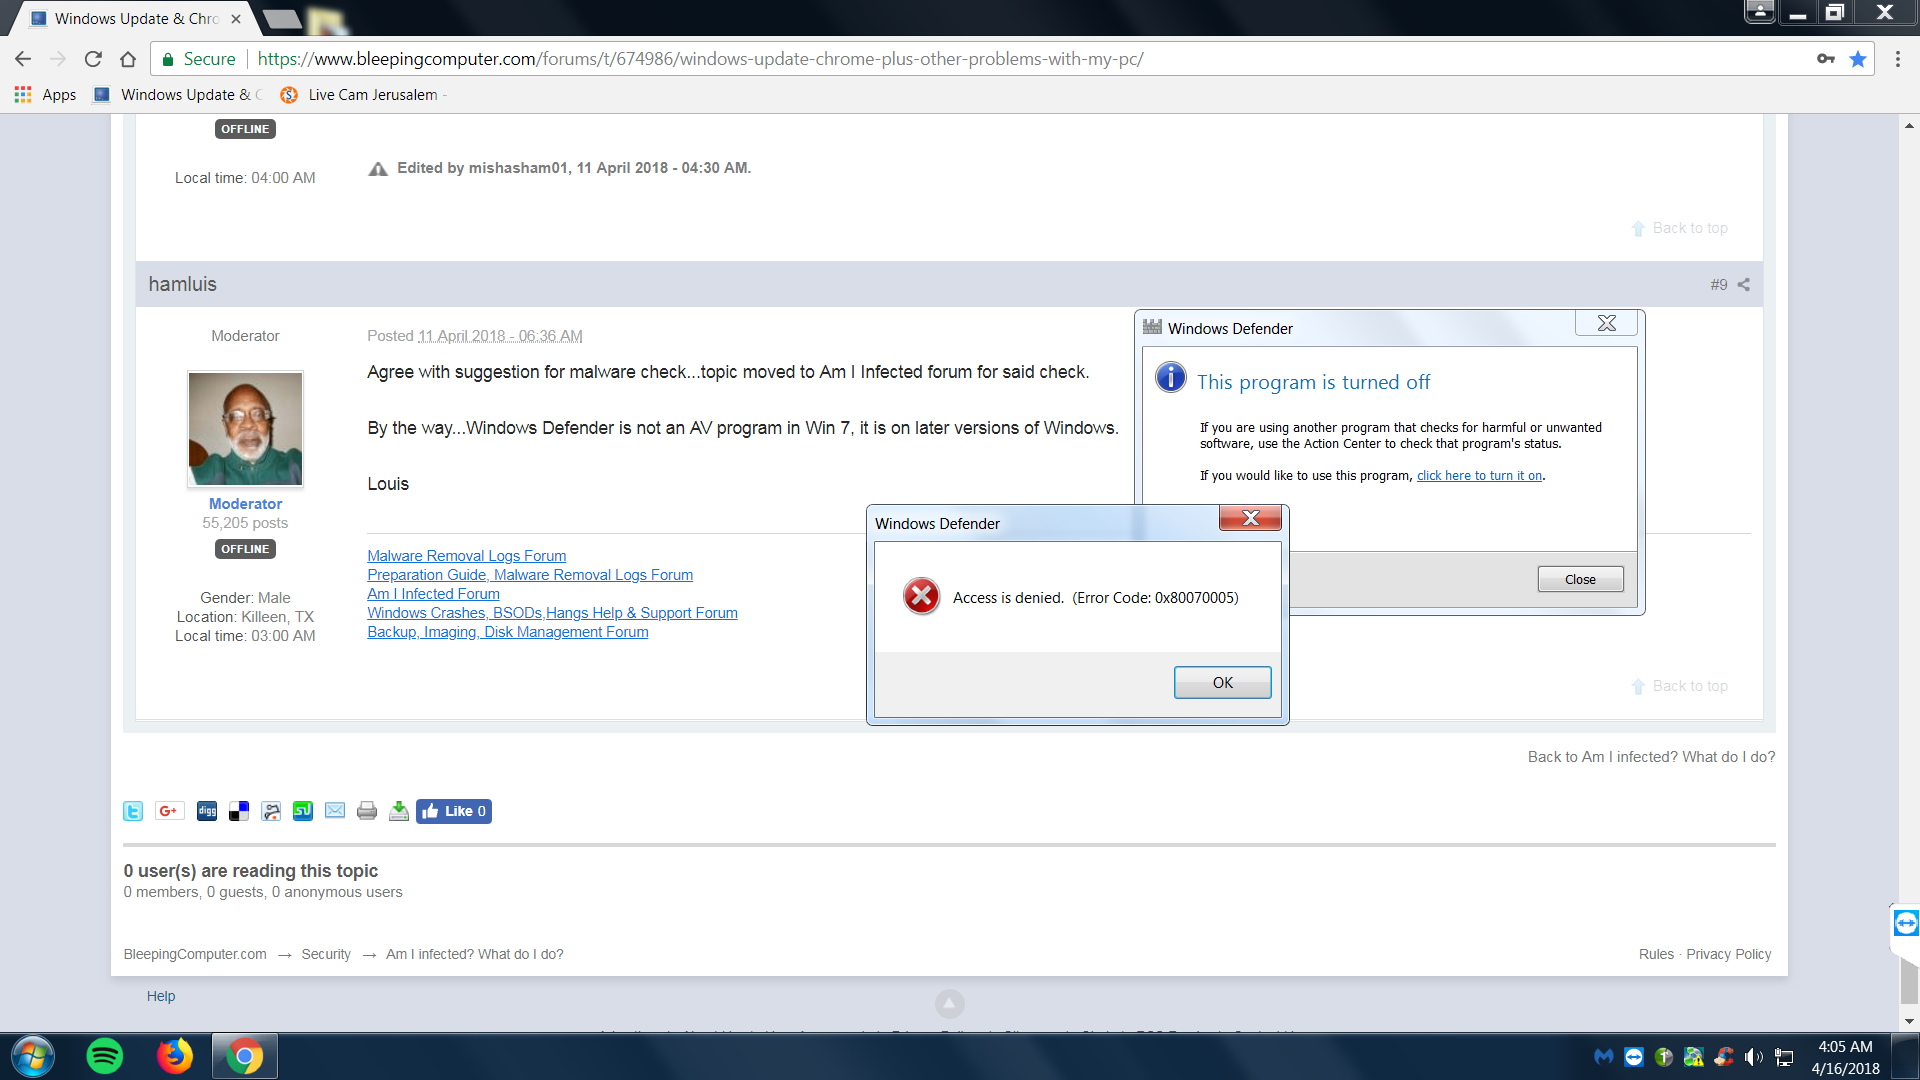 Qualxserv Service Agreement Windows Update Chrome Plus Other Problems With My Pc Am I